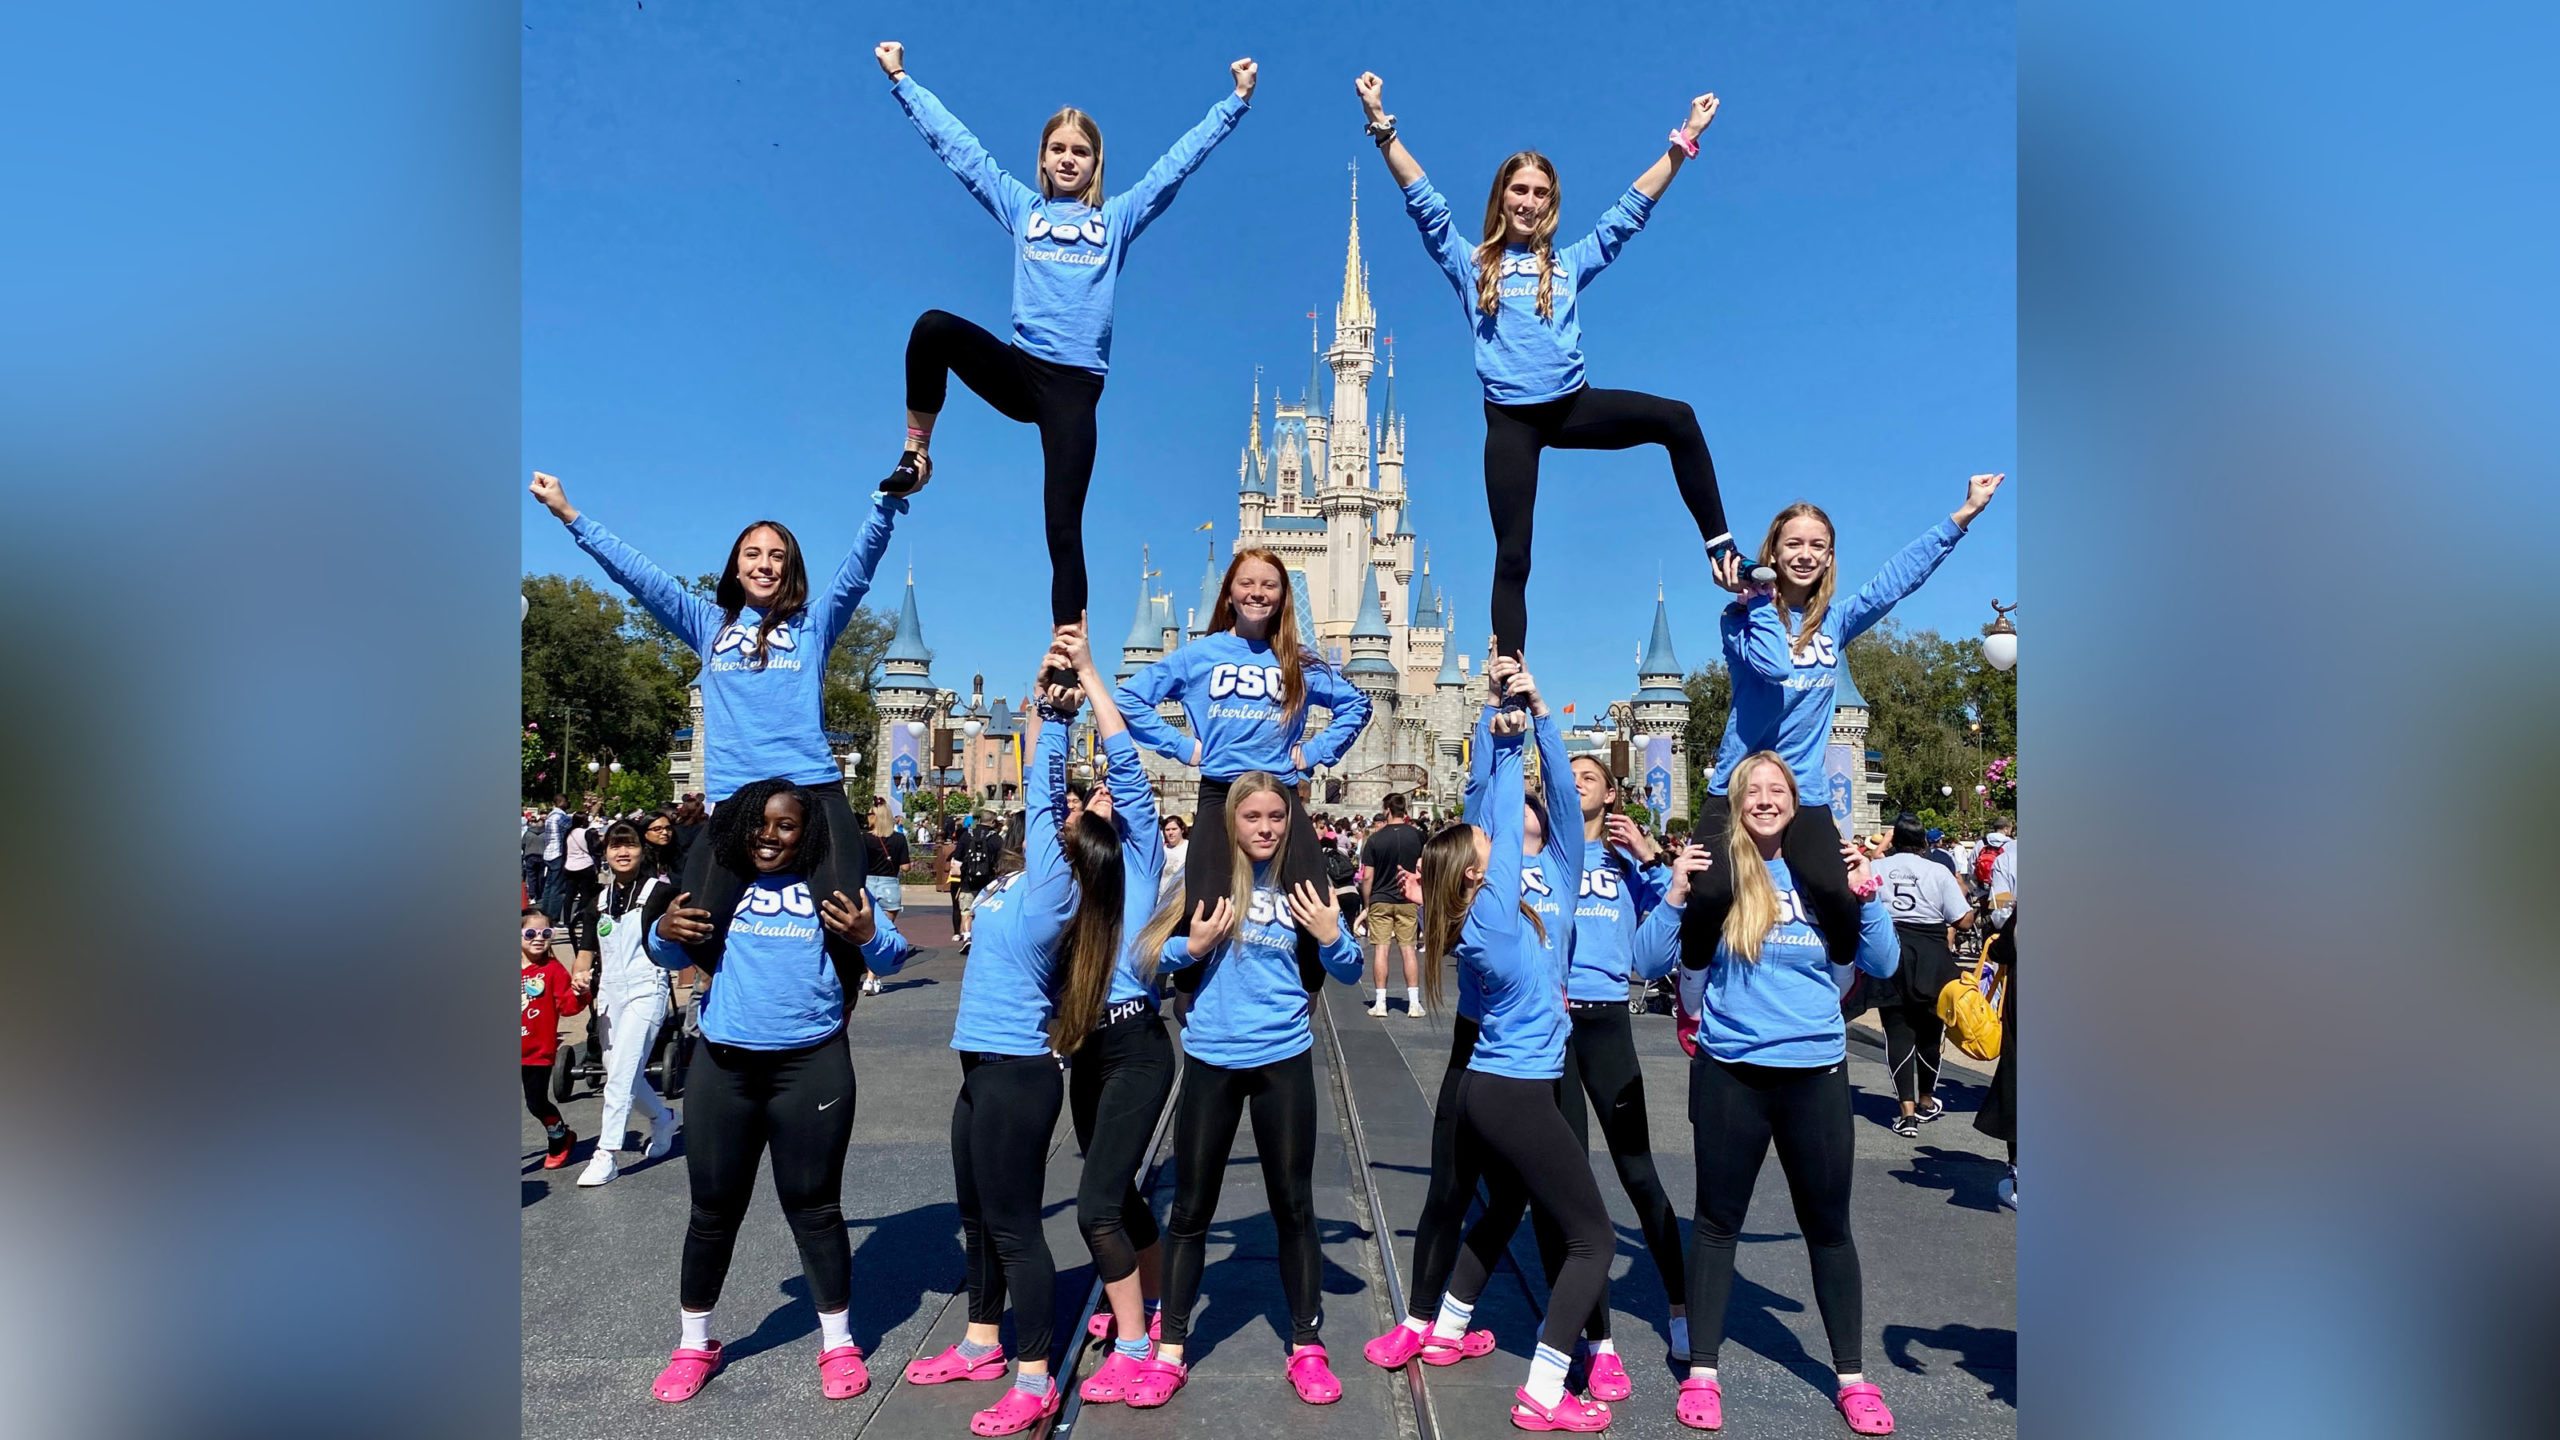 Coral Springs Charter School Cheerleaders at Nationals in Orlando. {courtesy CSC Athletics}